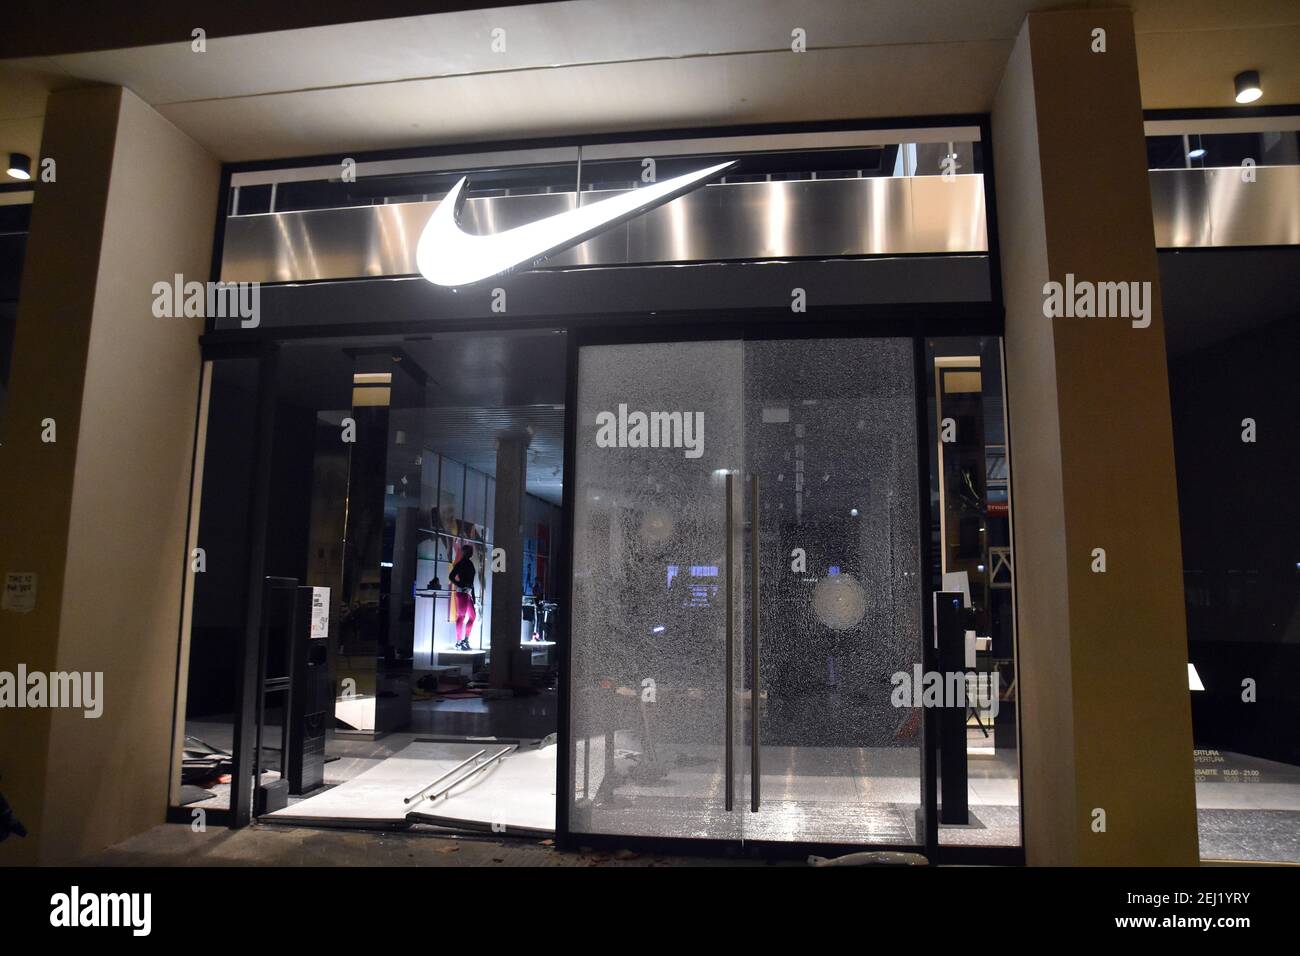 Nike Store Entrance High Resolution Stock Photography and Images - Alamy